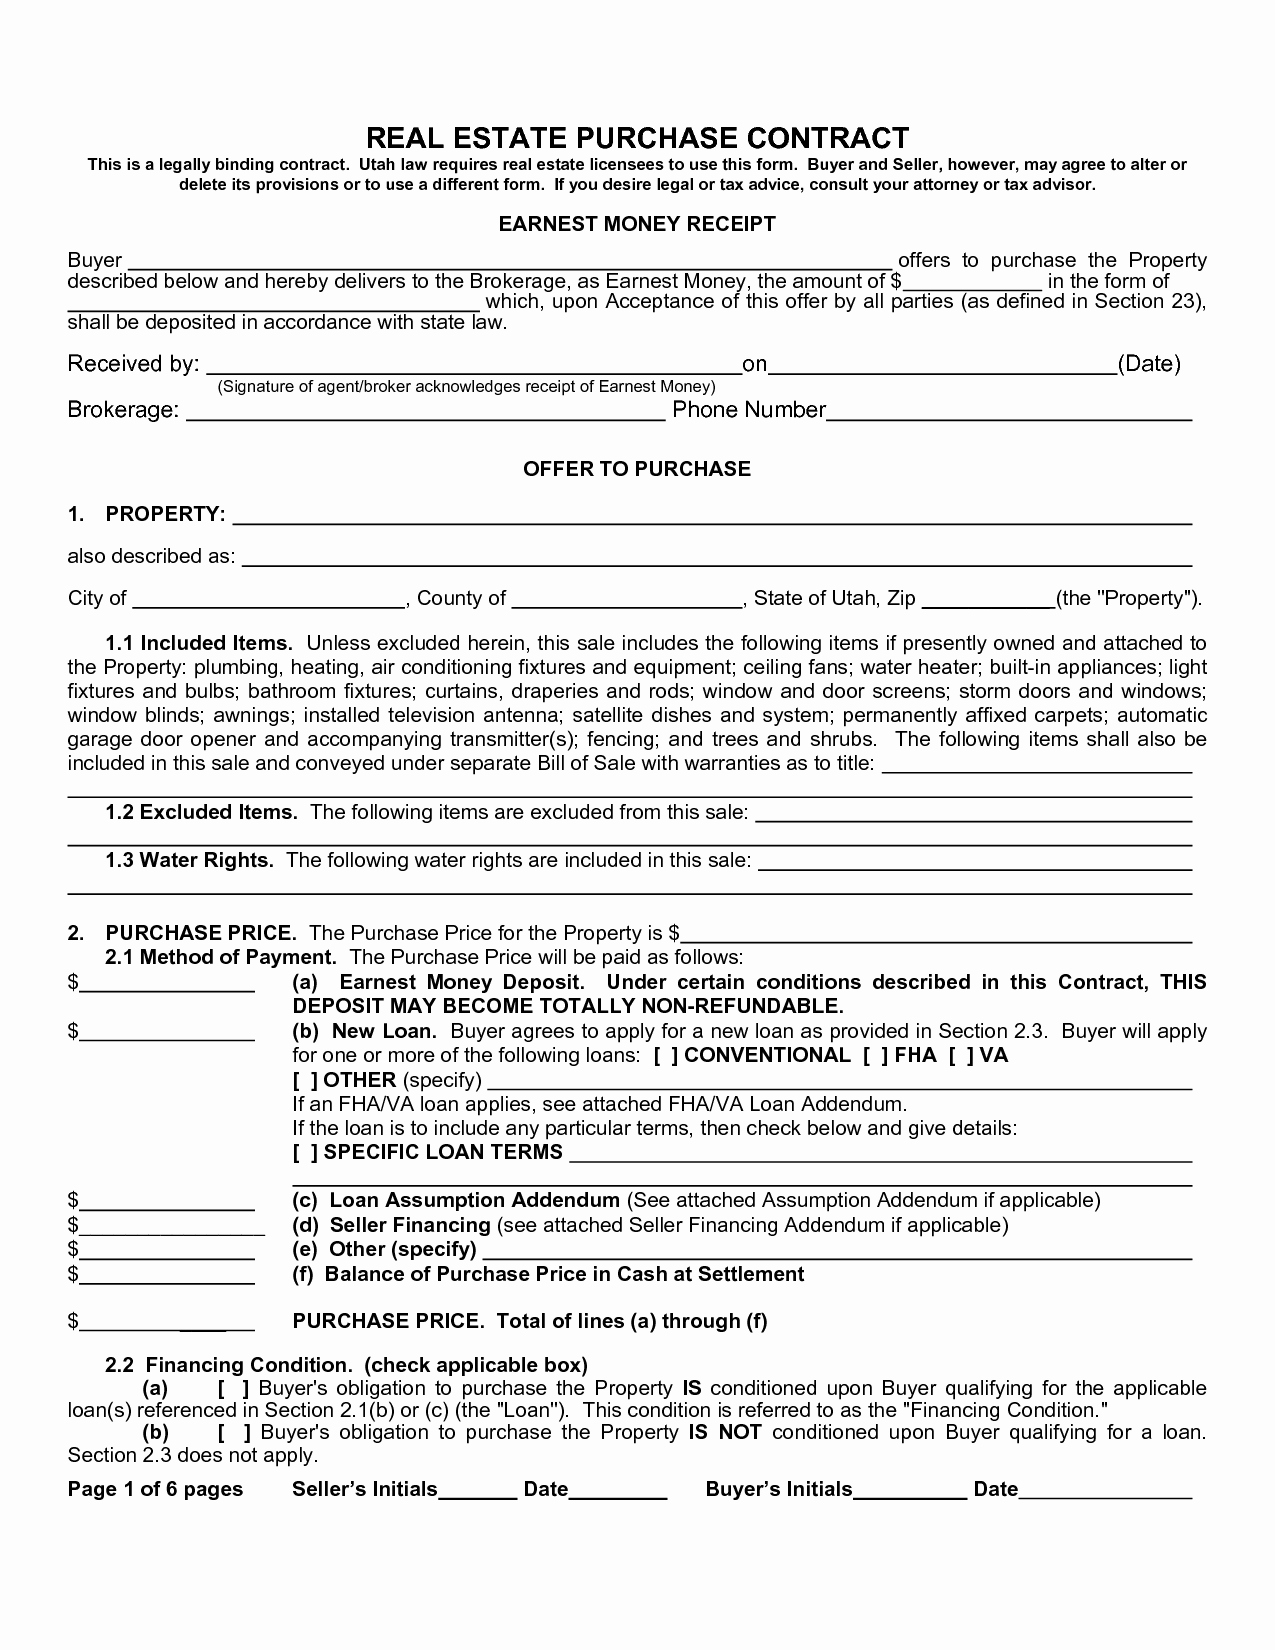 Estate Sale Contract Template Elegant Real Estate Purchase Agreement form Sample Image Gallery